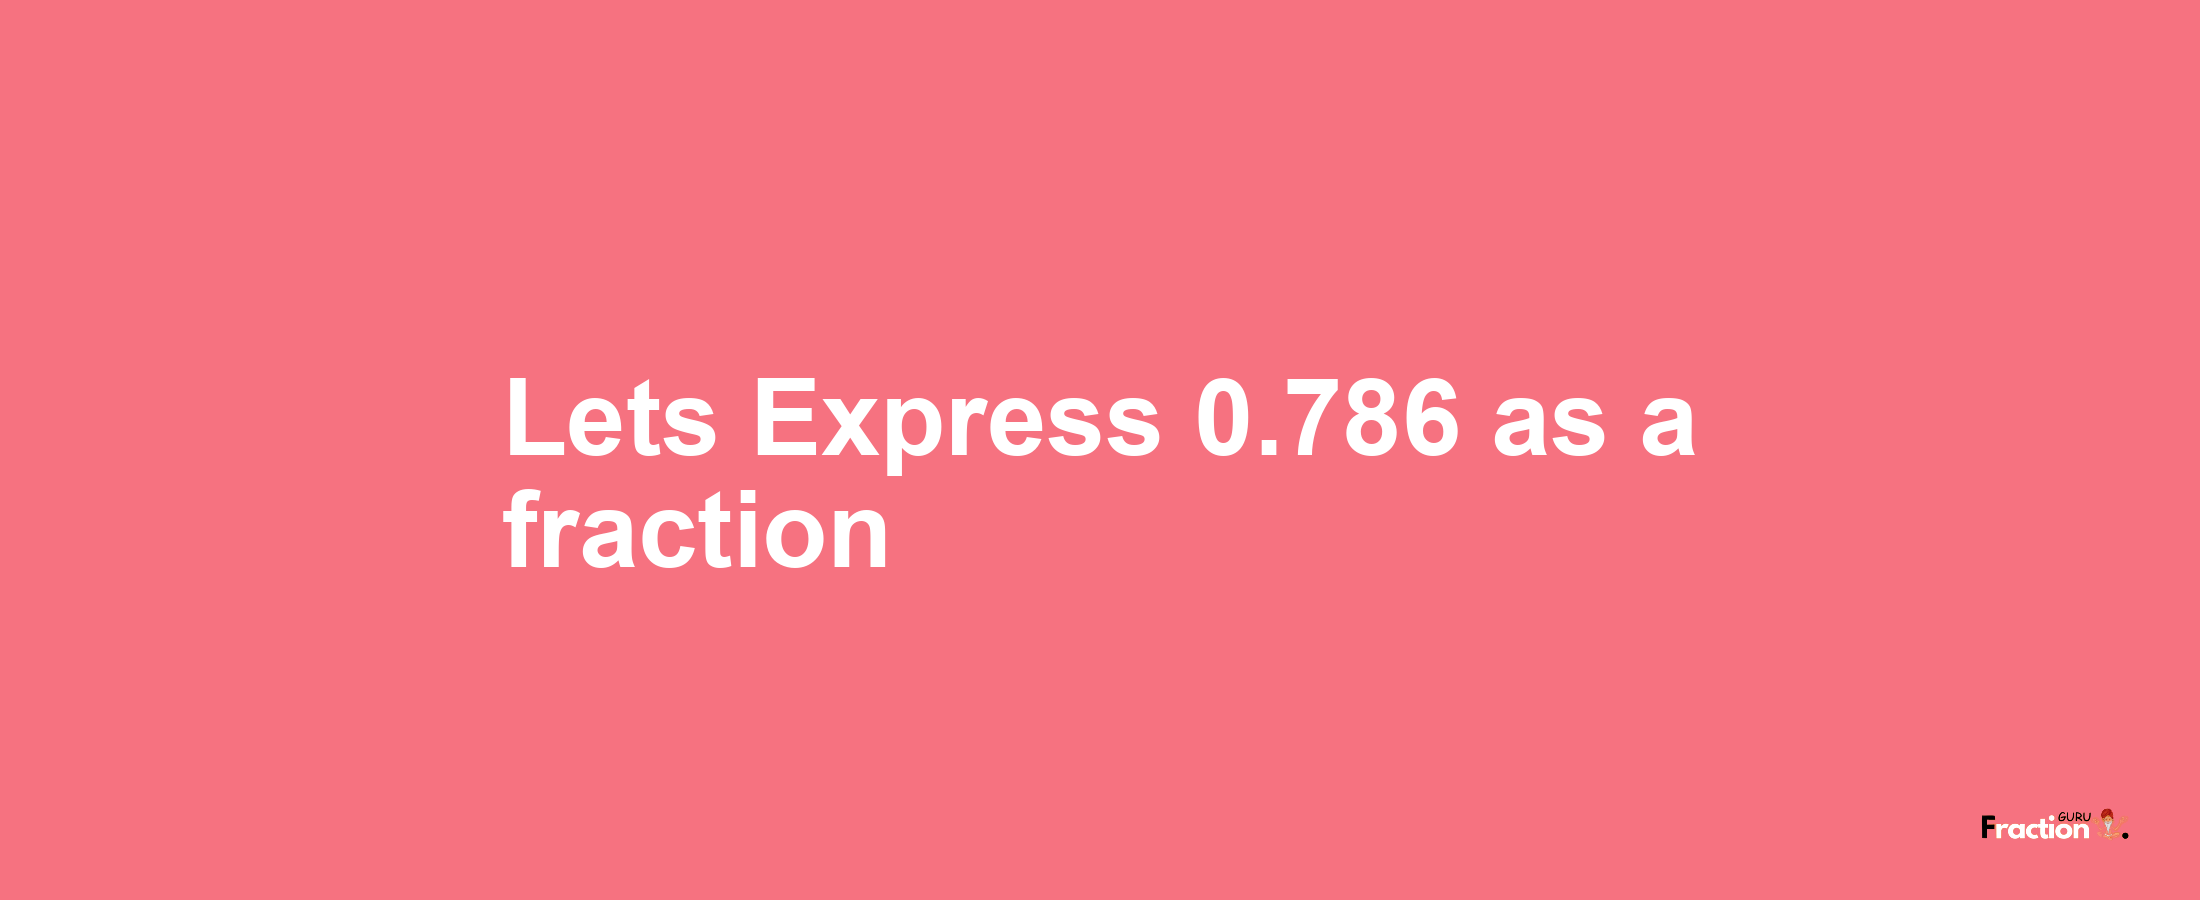 Lets Express 0.786 as afraction